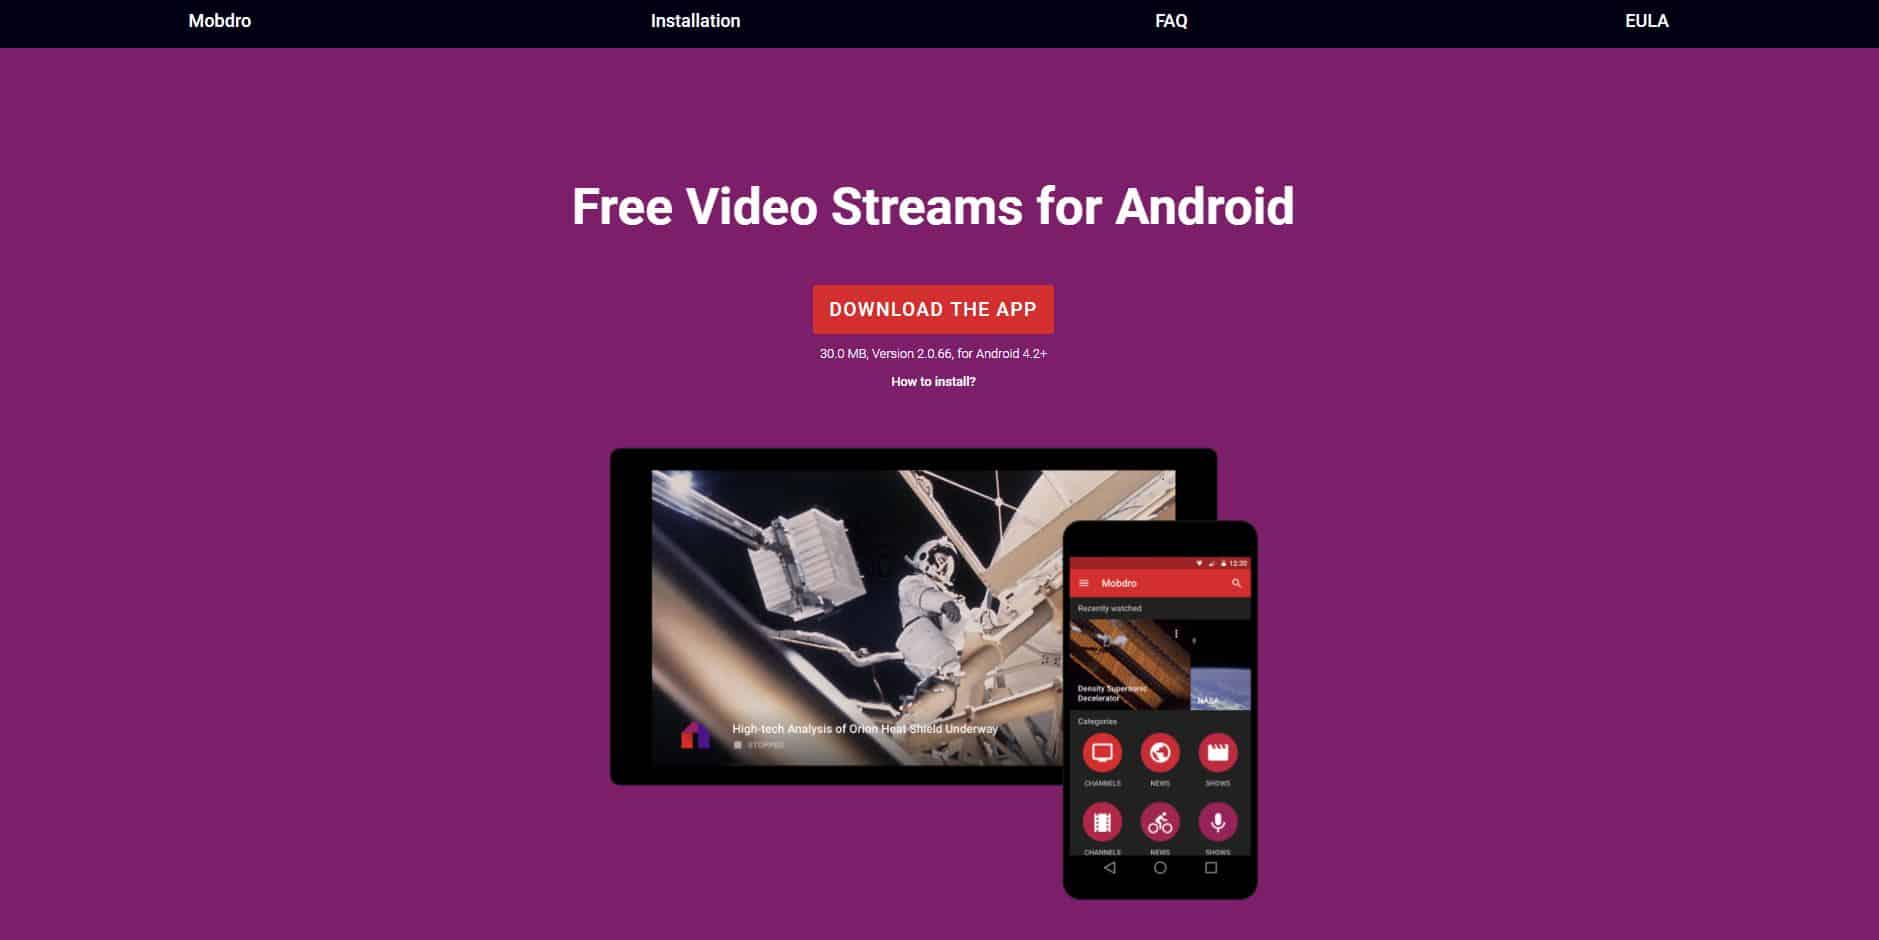 Interested in using Mobdro to stream TV shows directly from your Android de...